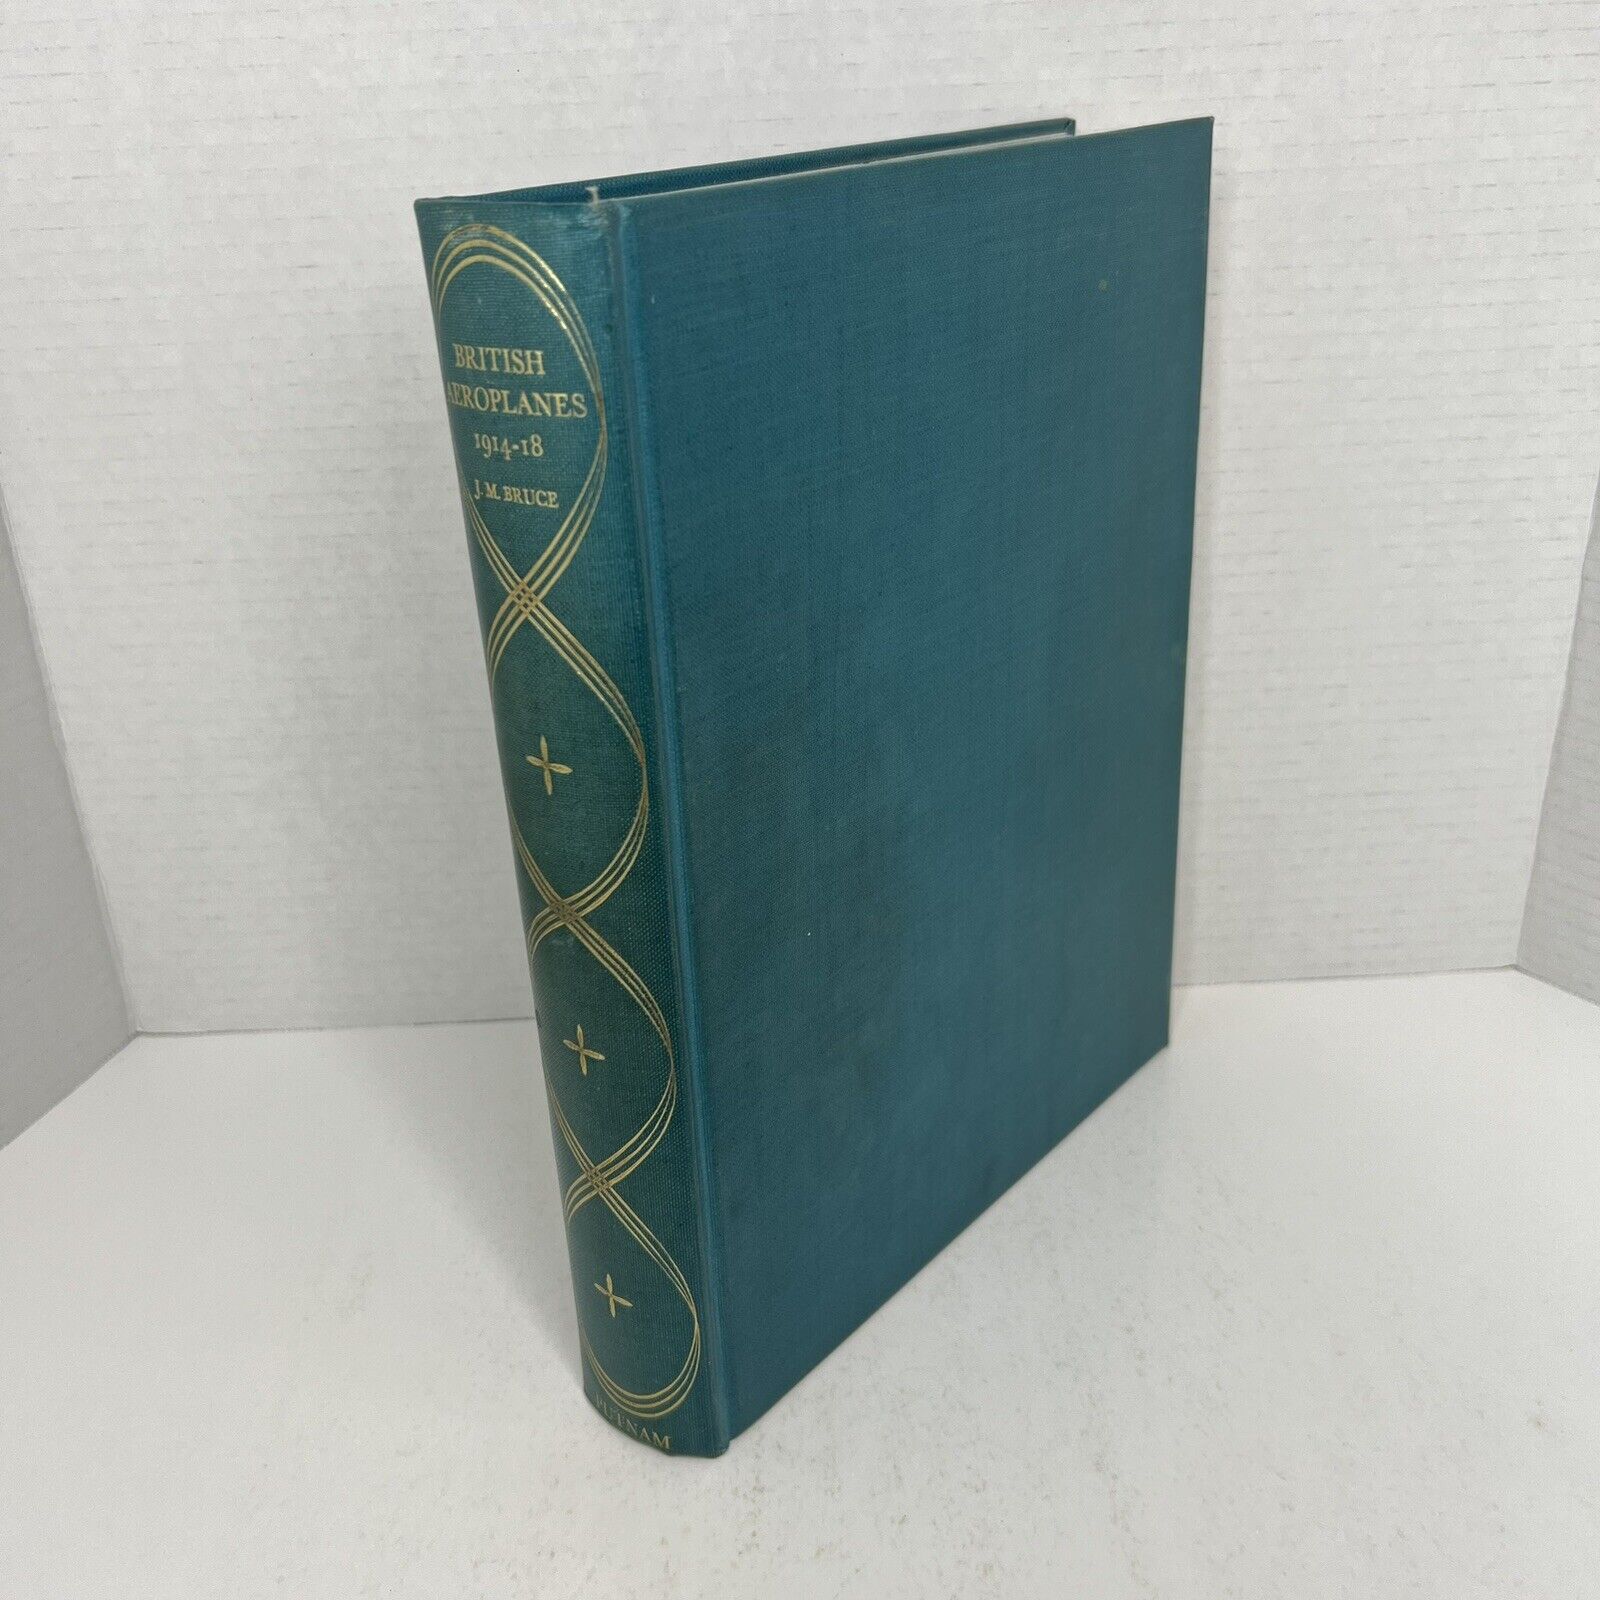 *SIGNED BY AUTHOR* BRITISH AEROPLANES 1914-1918 by J.M. Bruce 1957 WWI Aviation